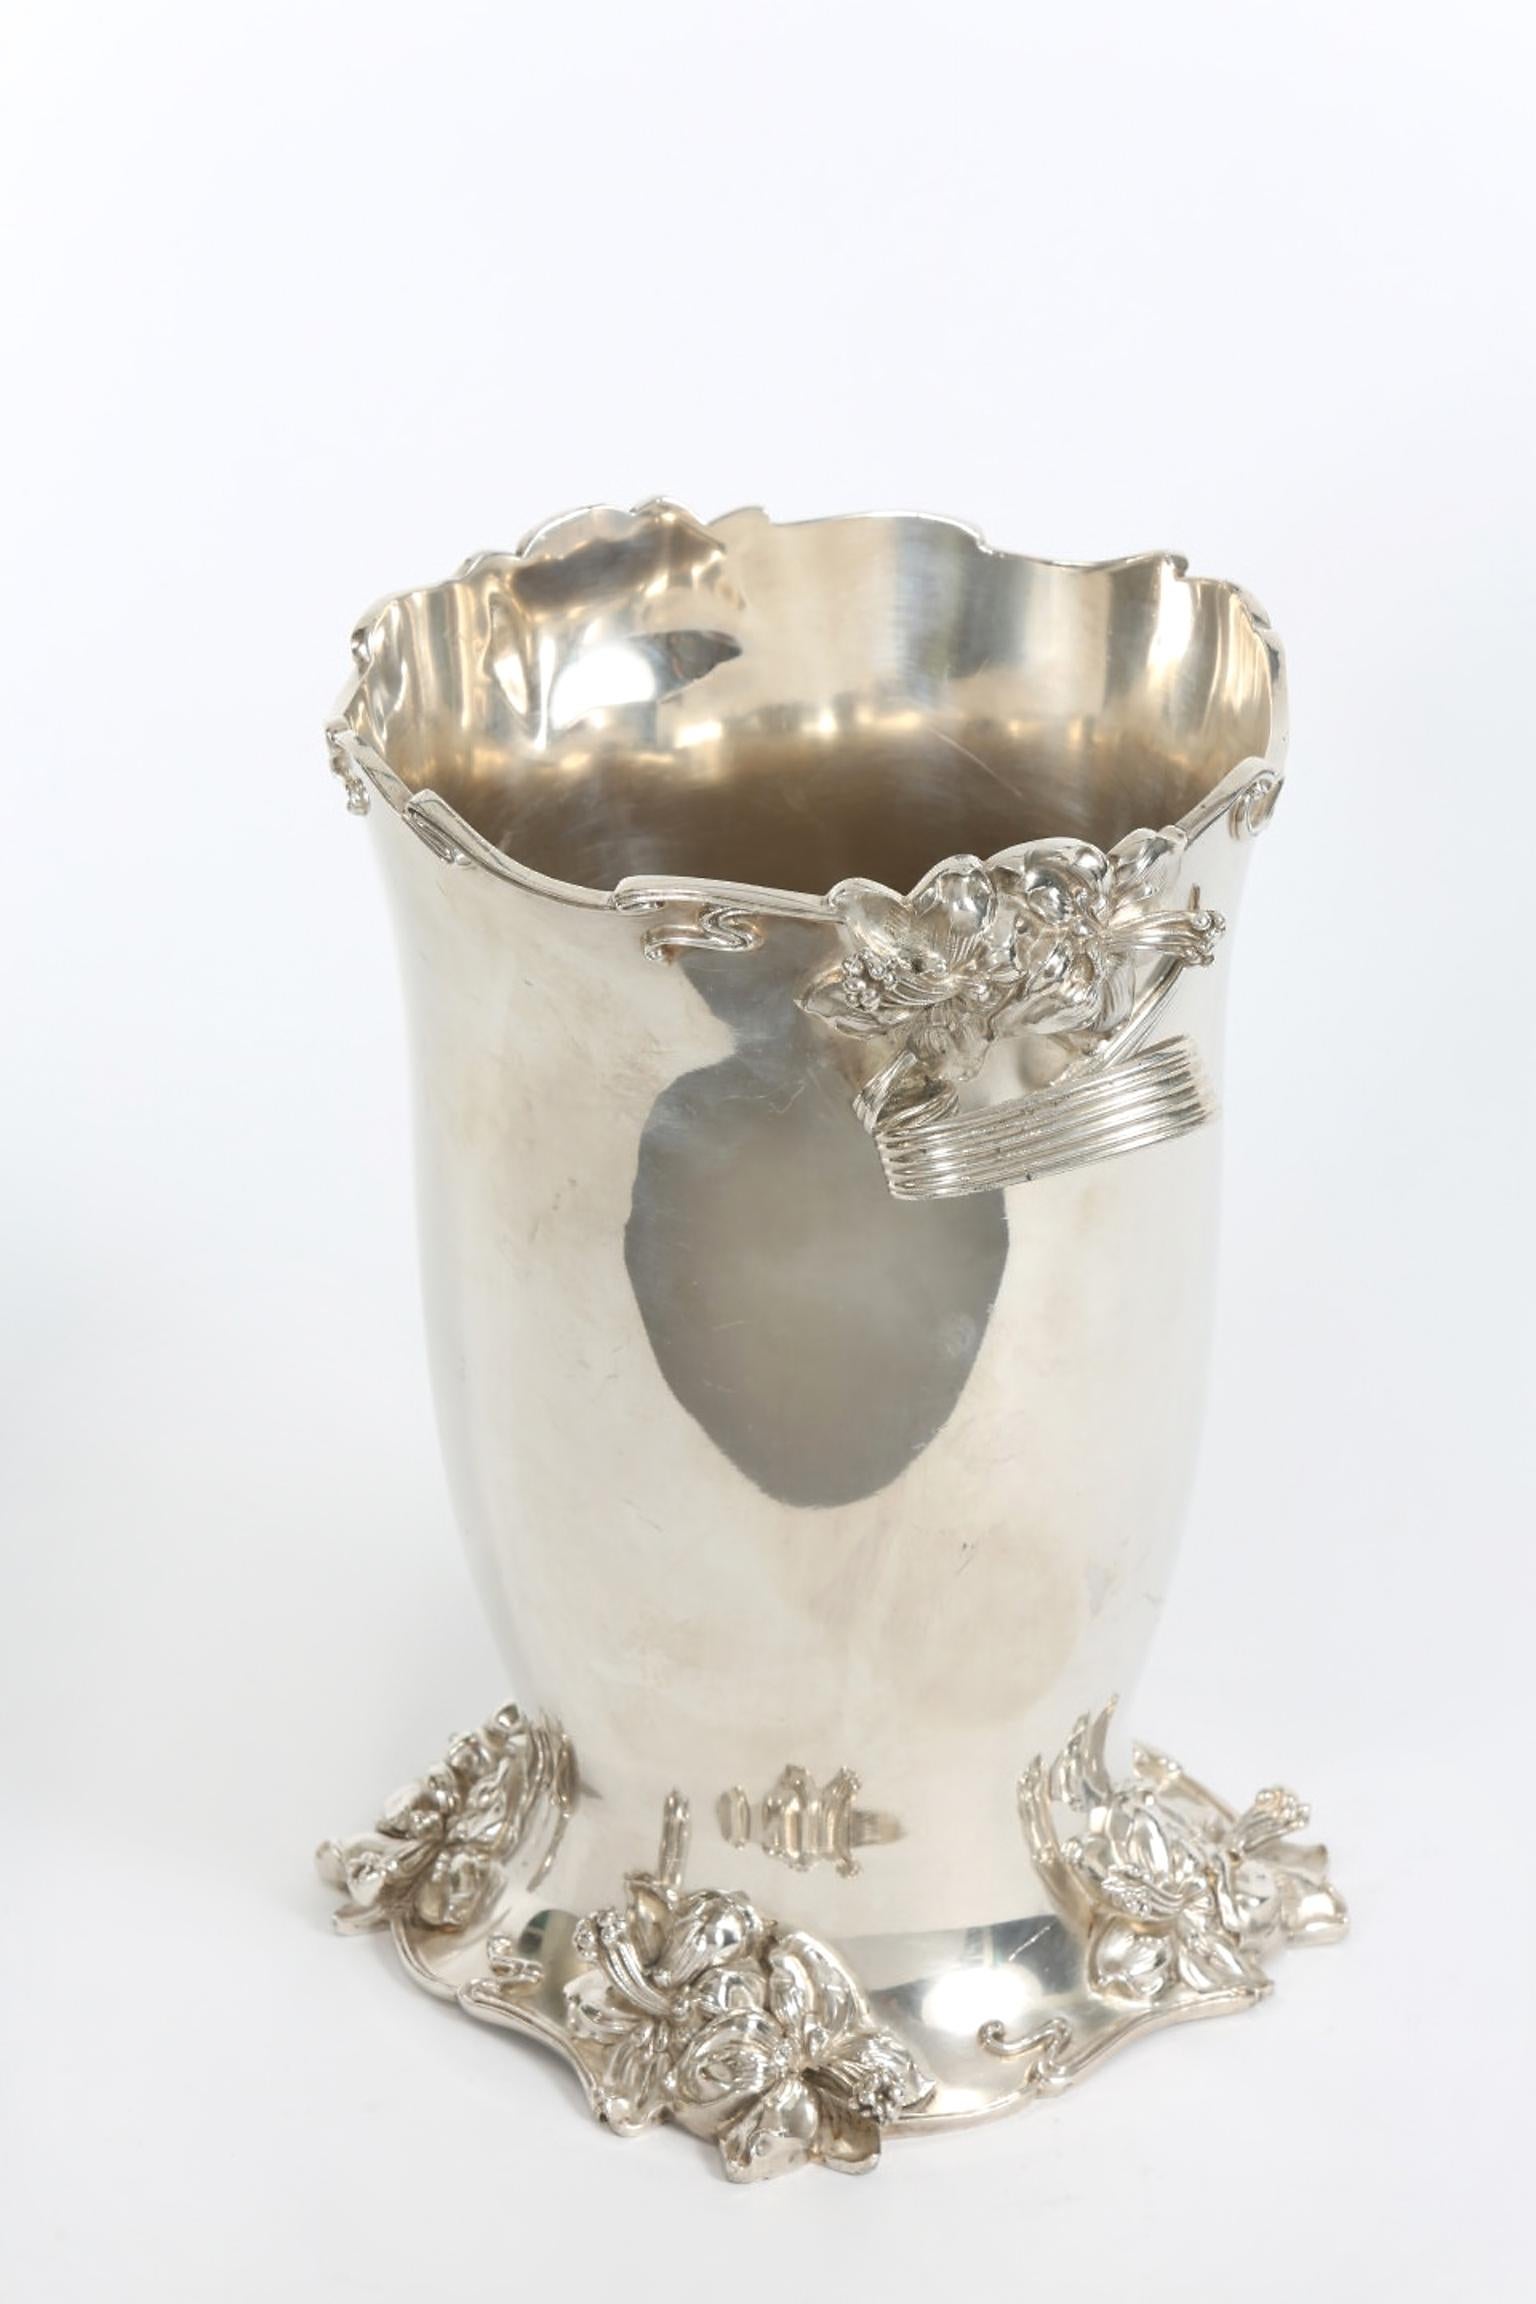 Art Nouveau Silver Plated Cooler / Ice Bucket 2